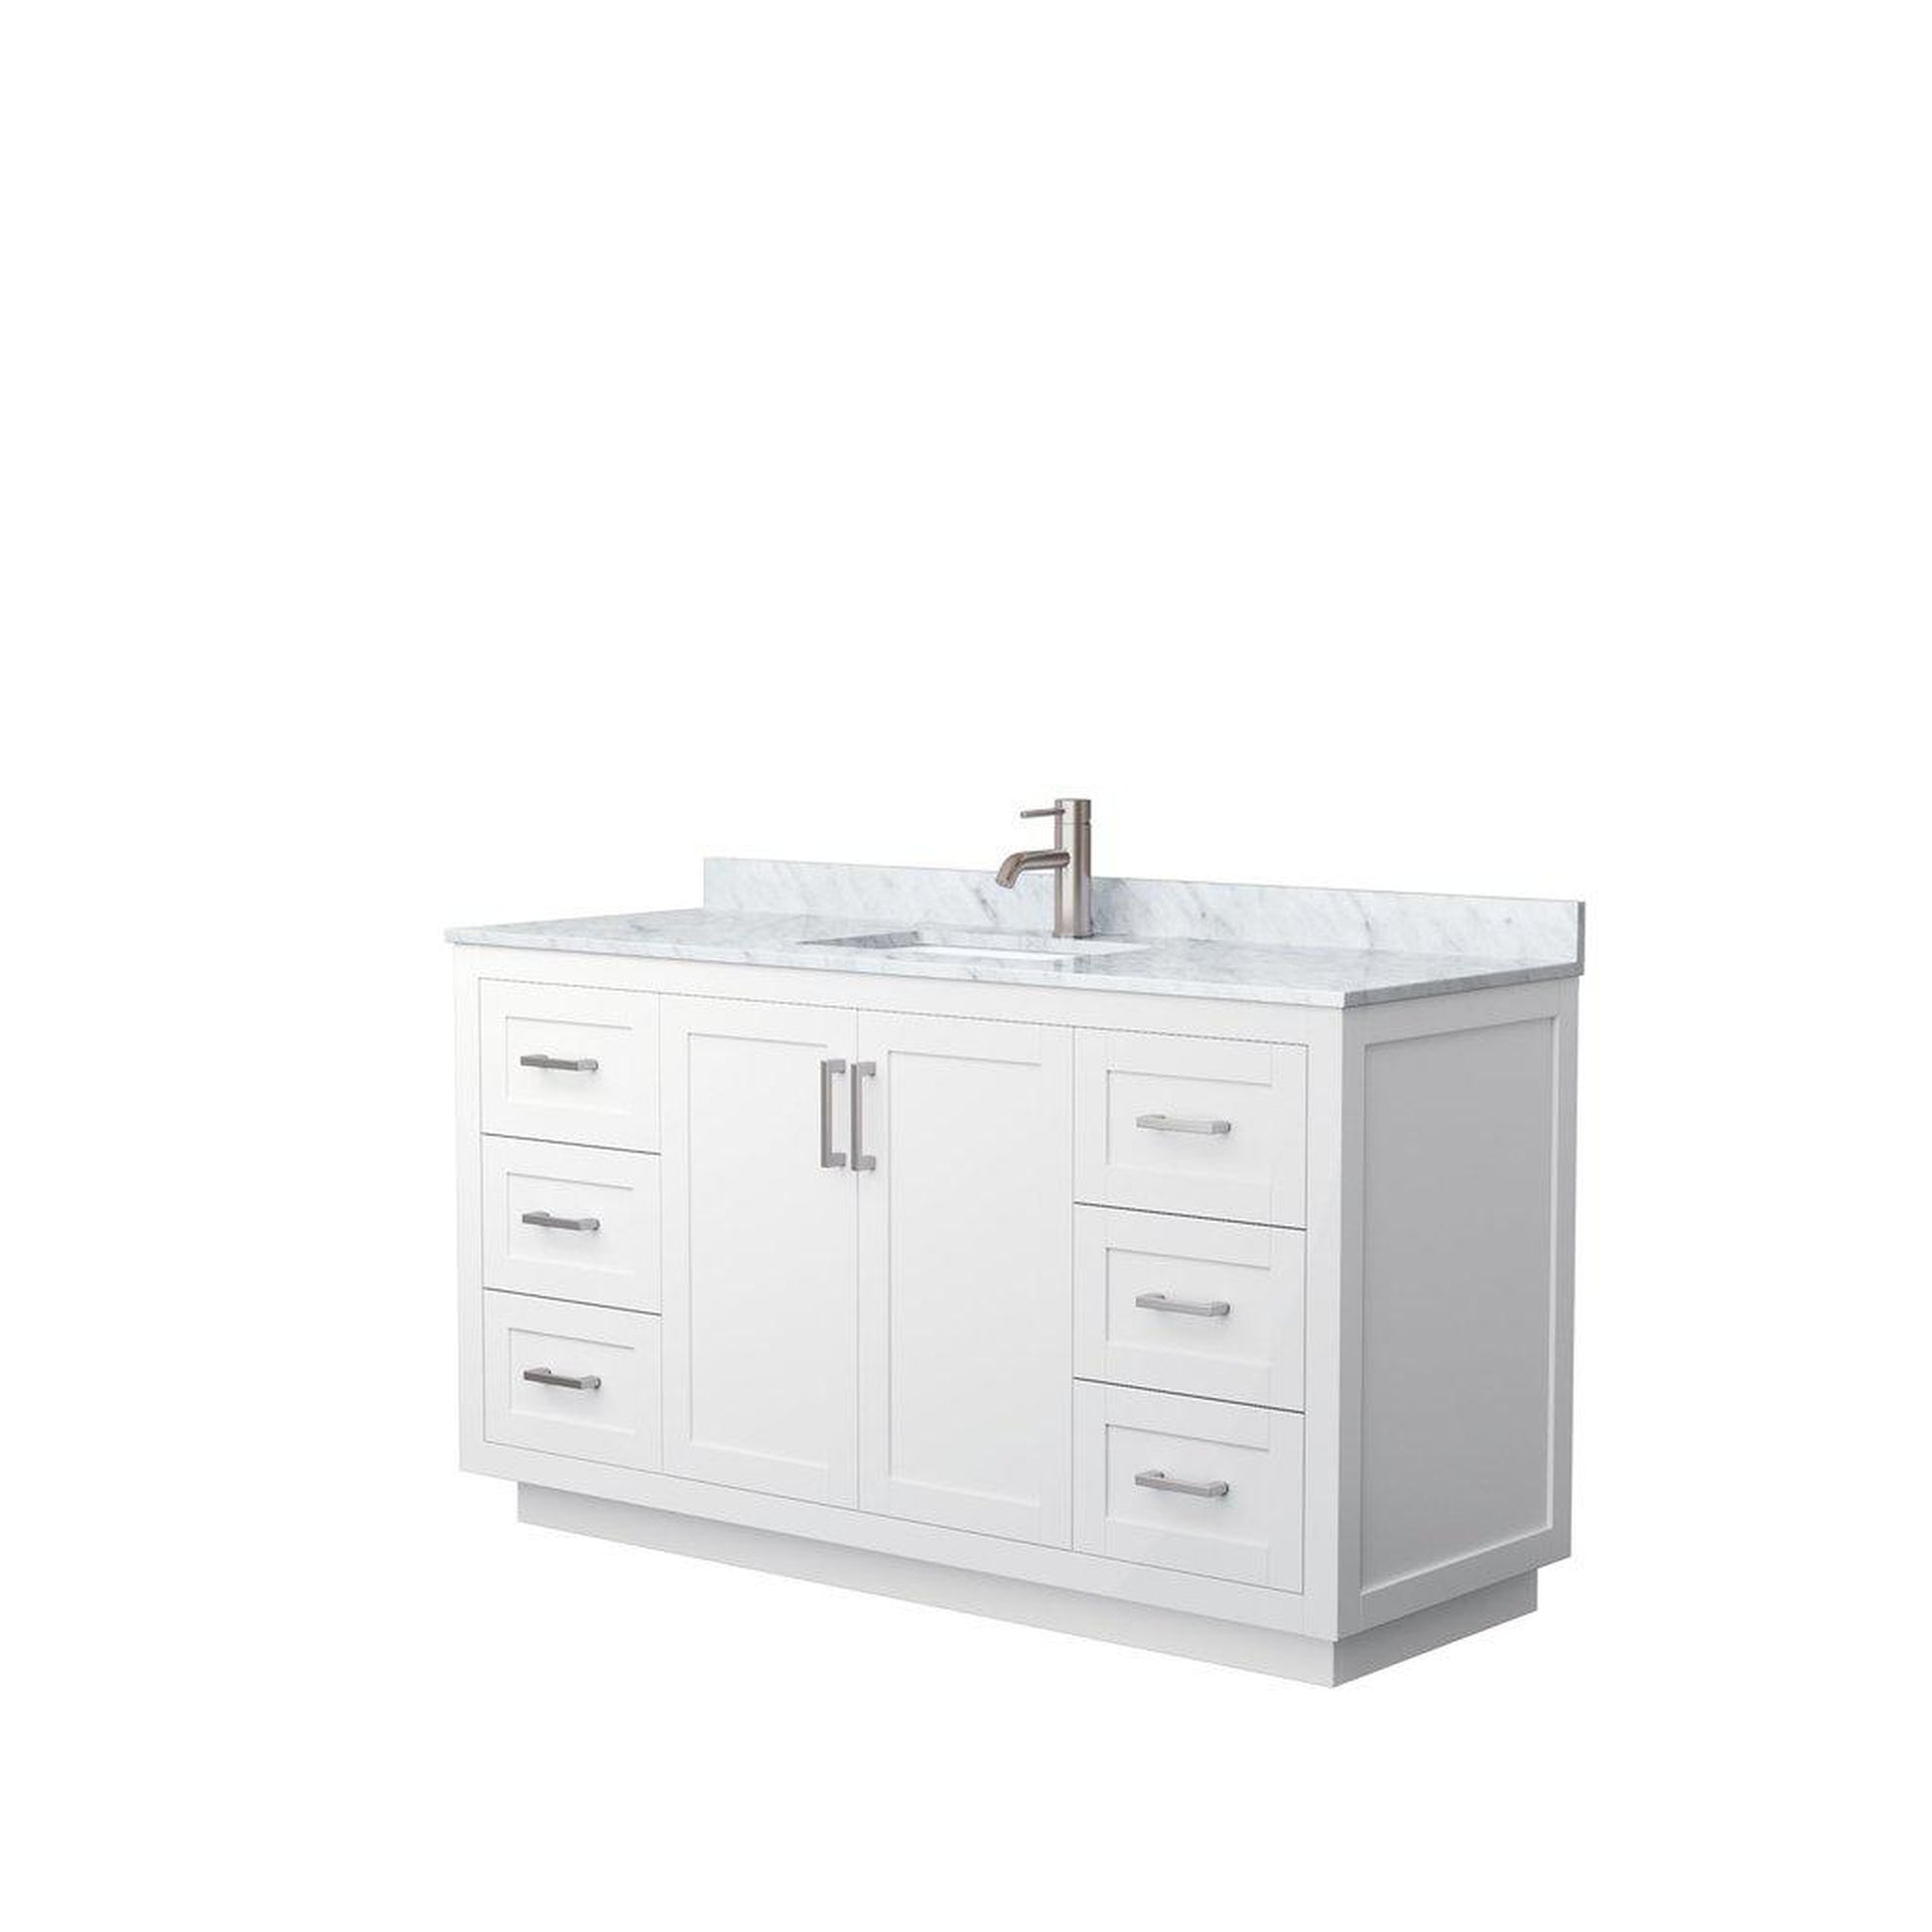 Wyndham Collection Miranda 60" Single Bathroom White Vanity Set With White Carrara Marble Countertop, Undermount Square Sink, And Brushed Nickel Trim